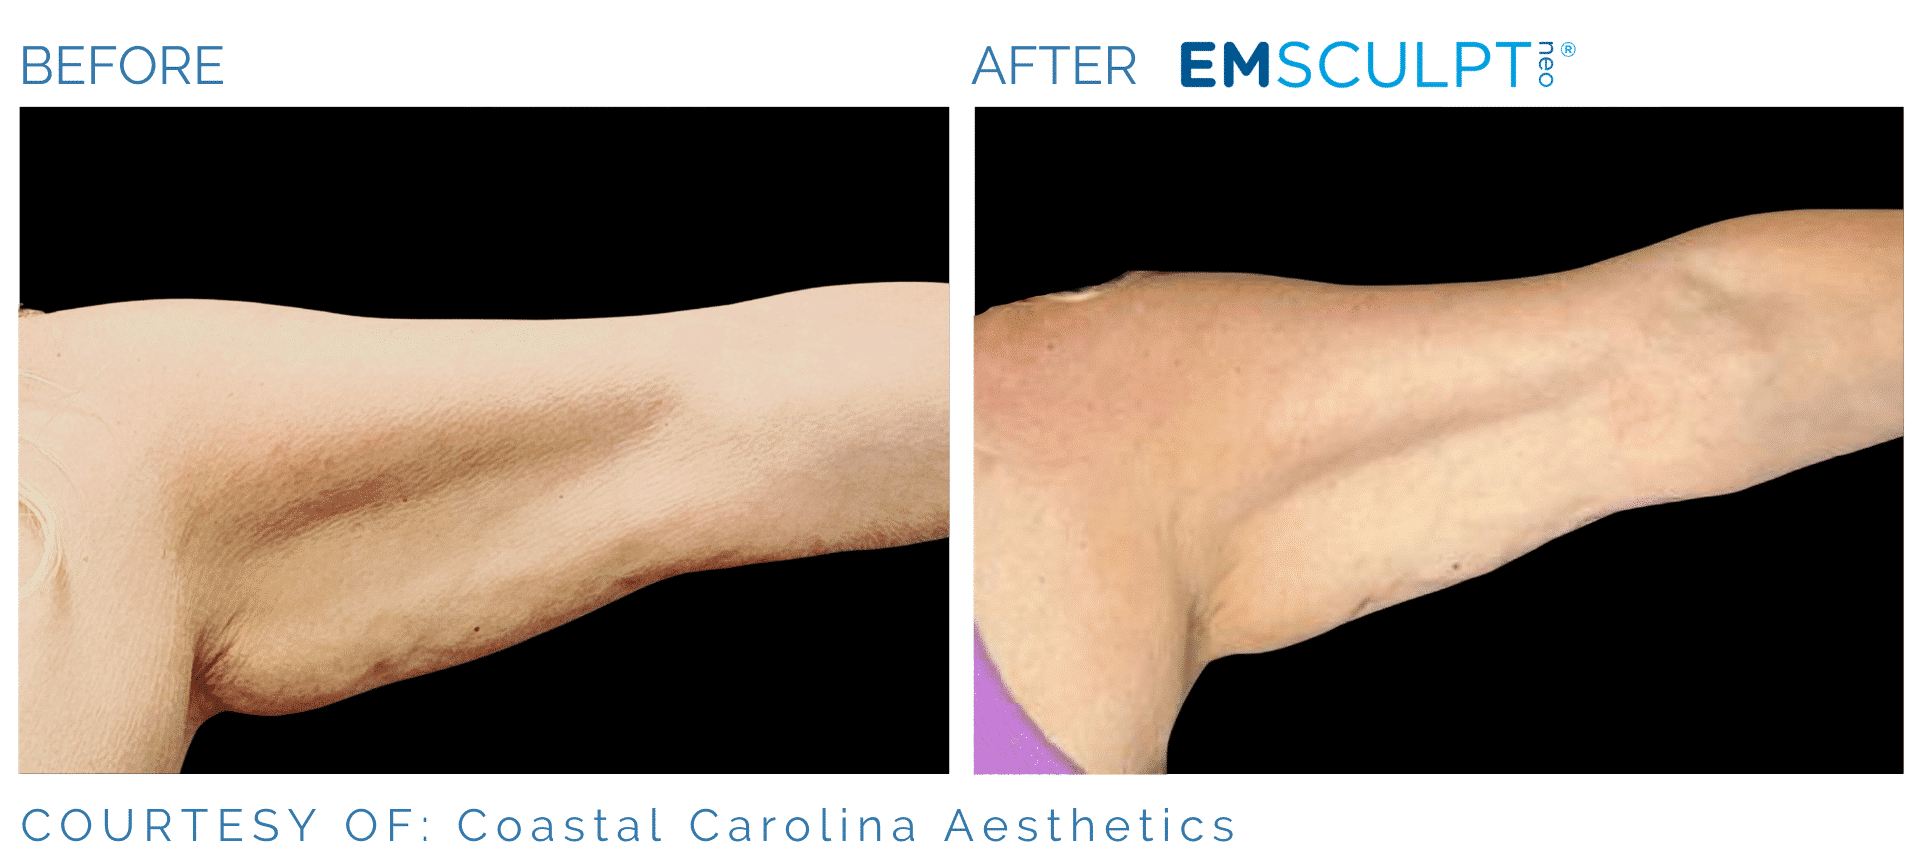 Emsculpt NEO Arms Before and After Treament